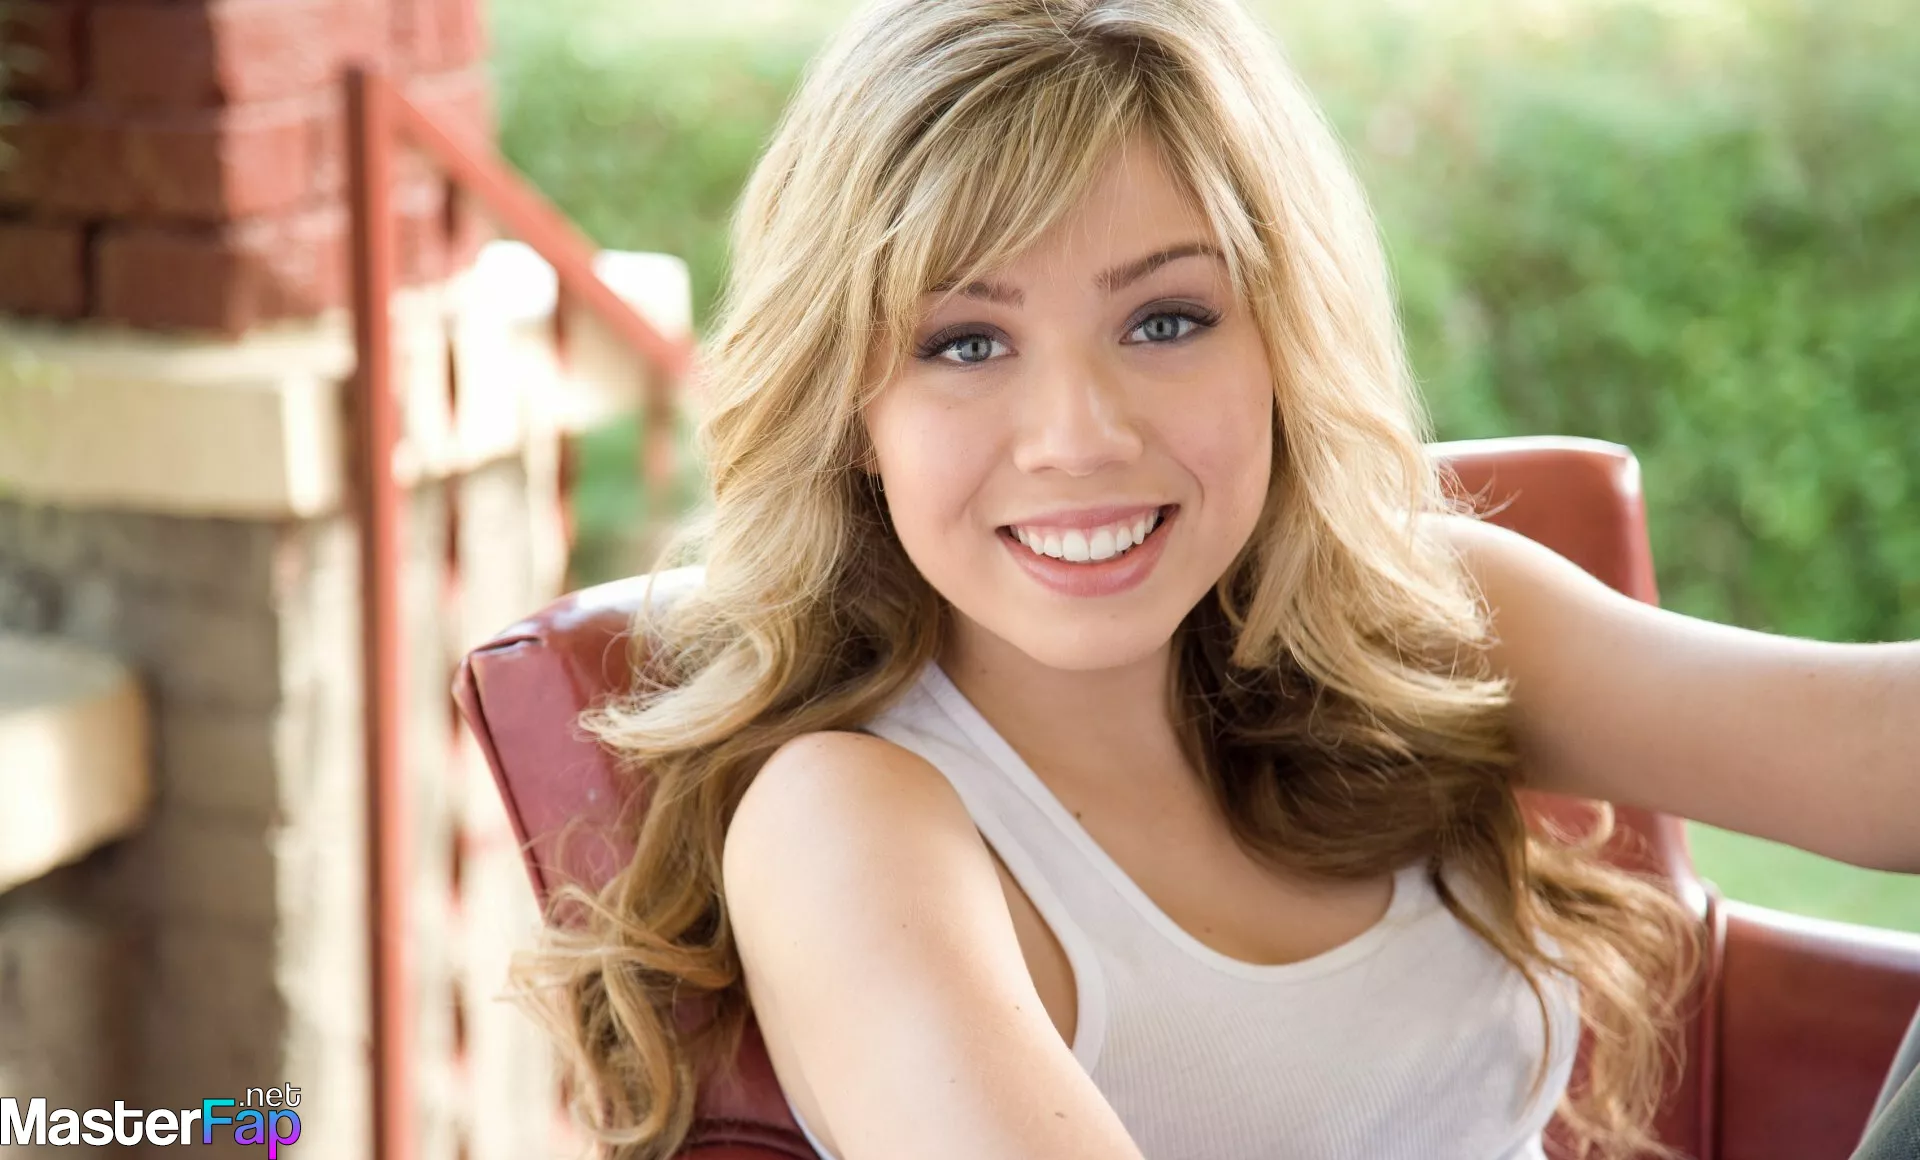 jennette mccurdy naked pictures